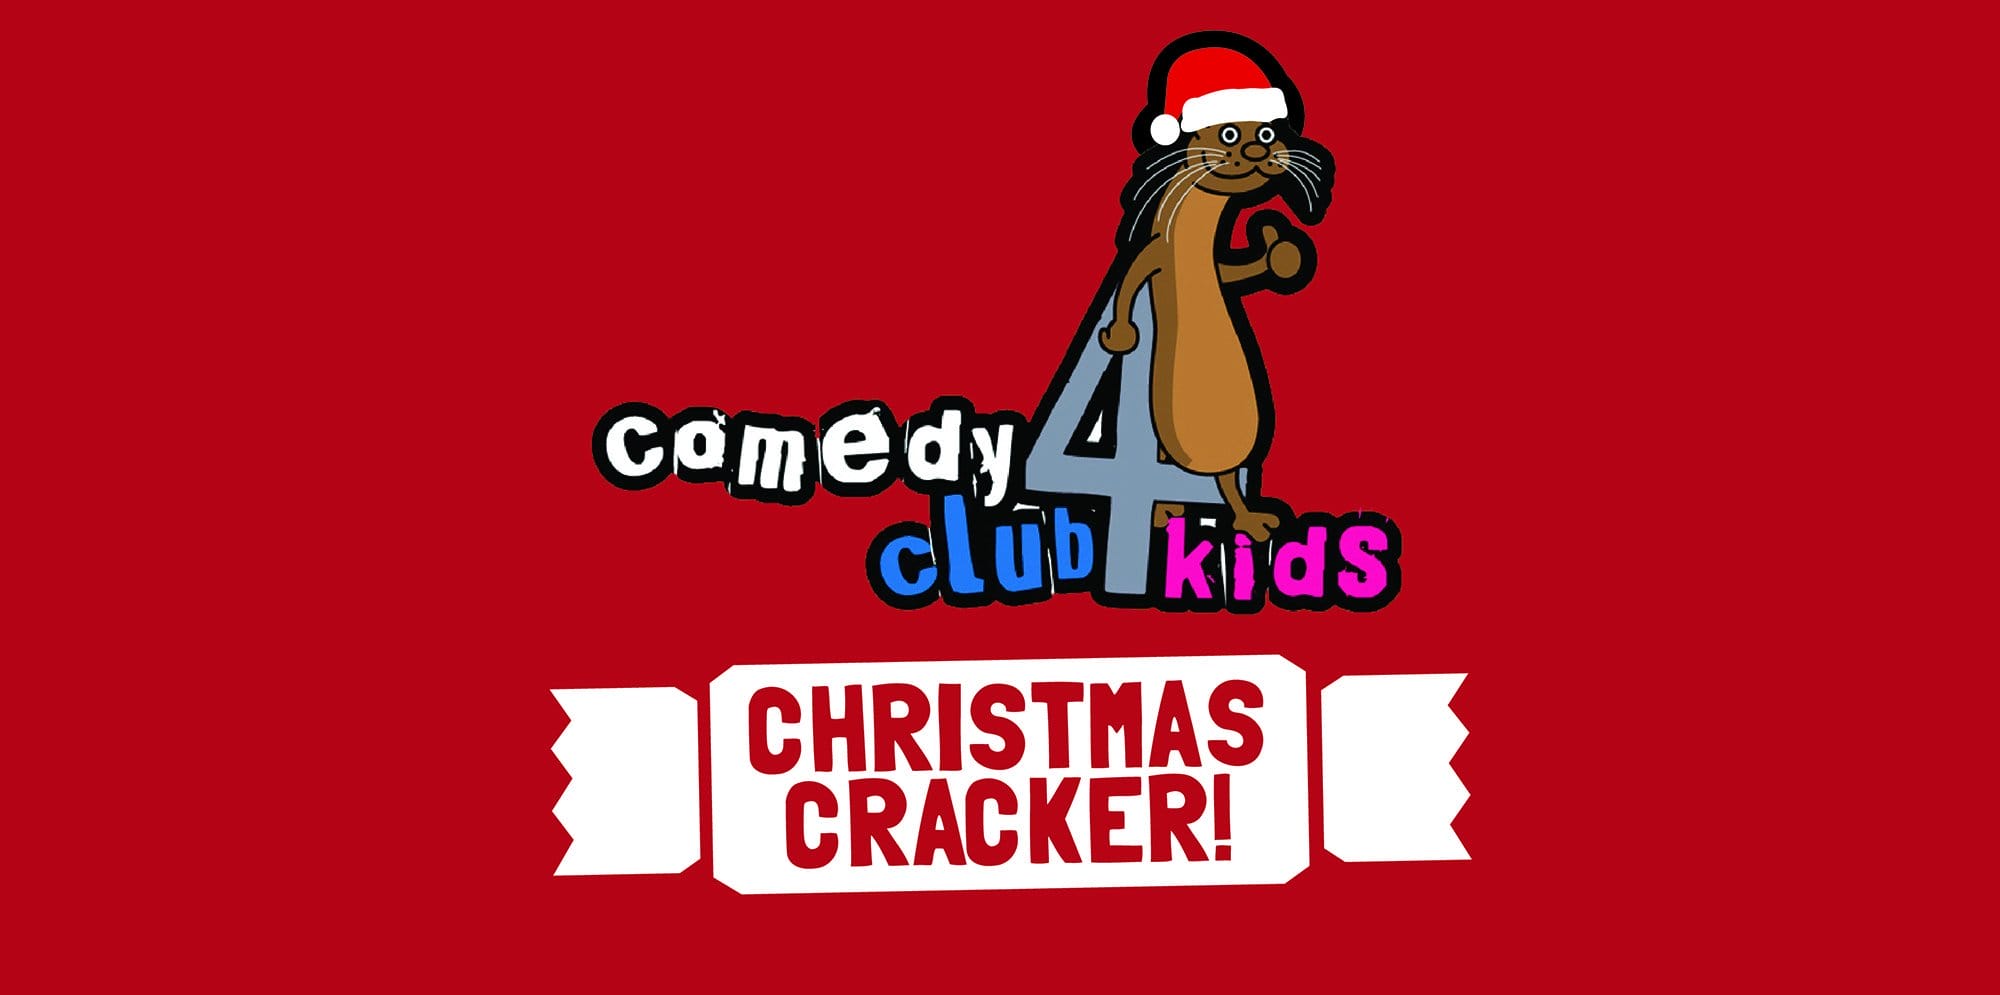 A cartoon otter wearing a Christmas hat with a red background stands on a title. The title reads 